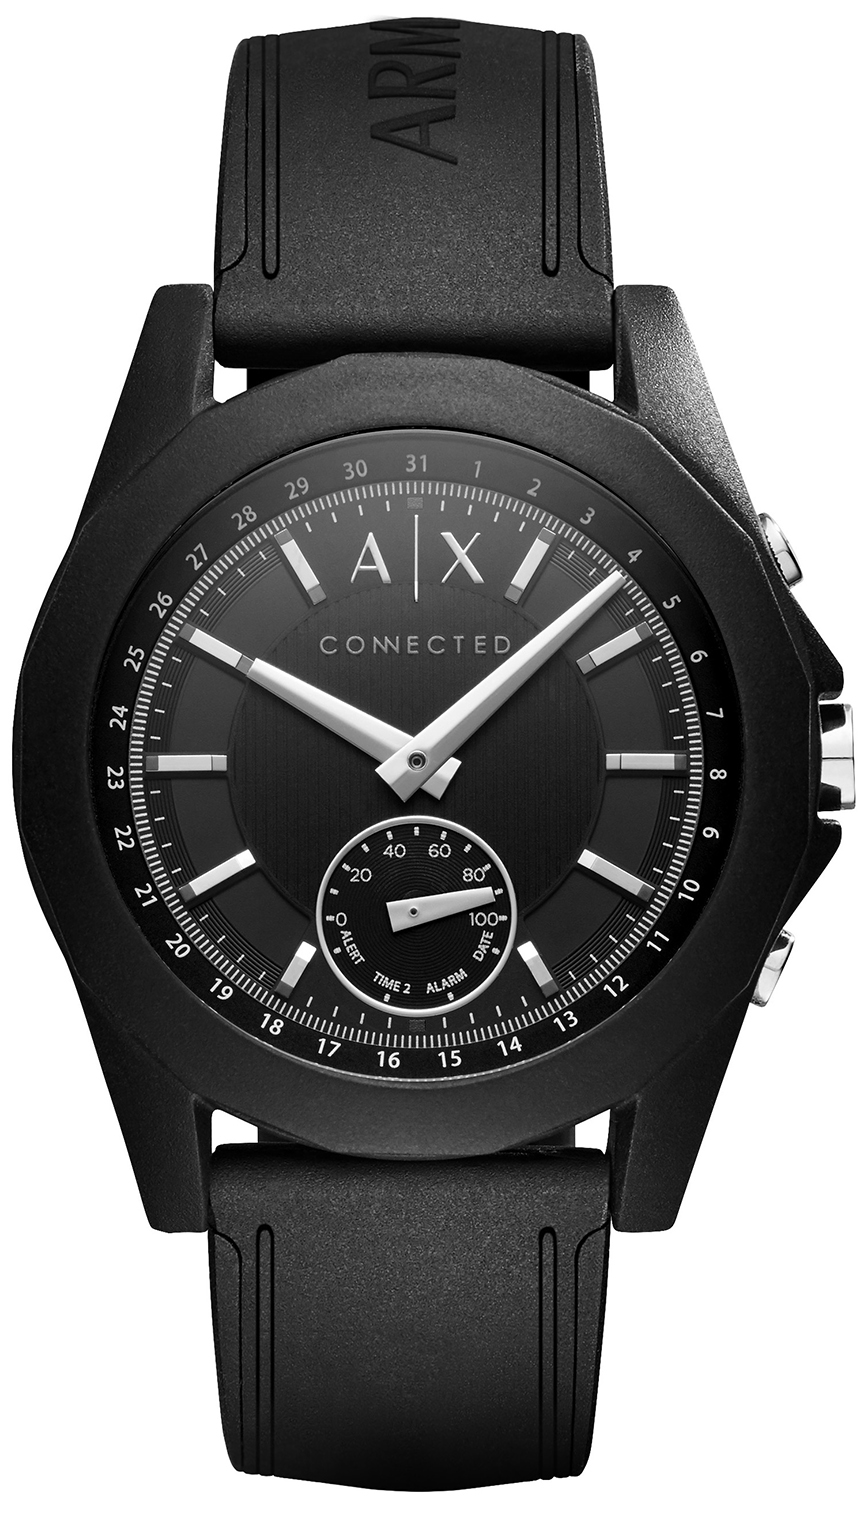 armani-exchange-ax-connected-smart-watch-4